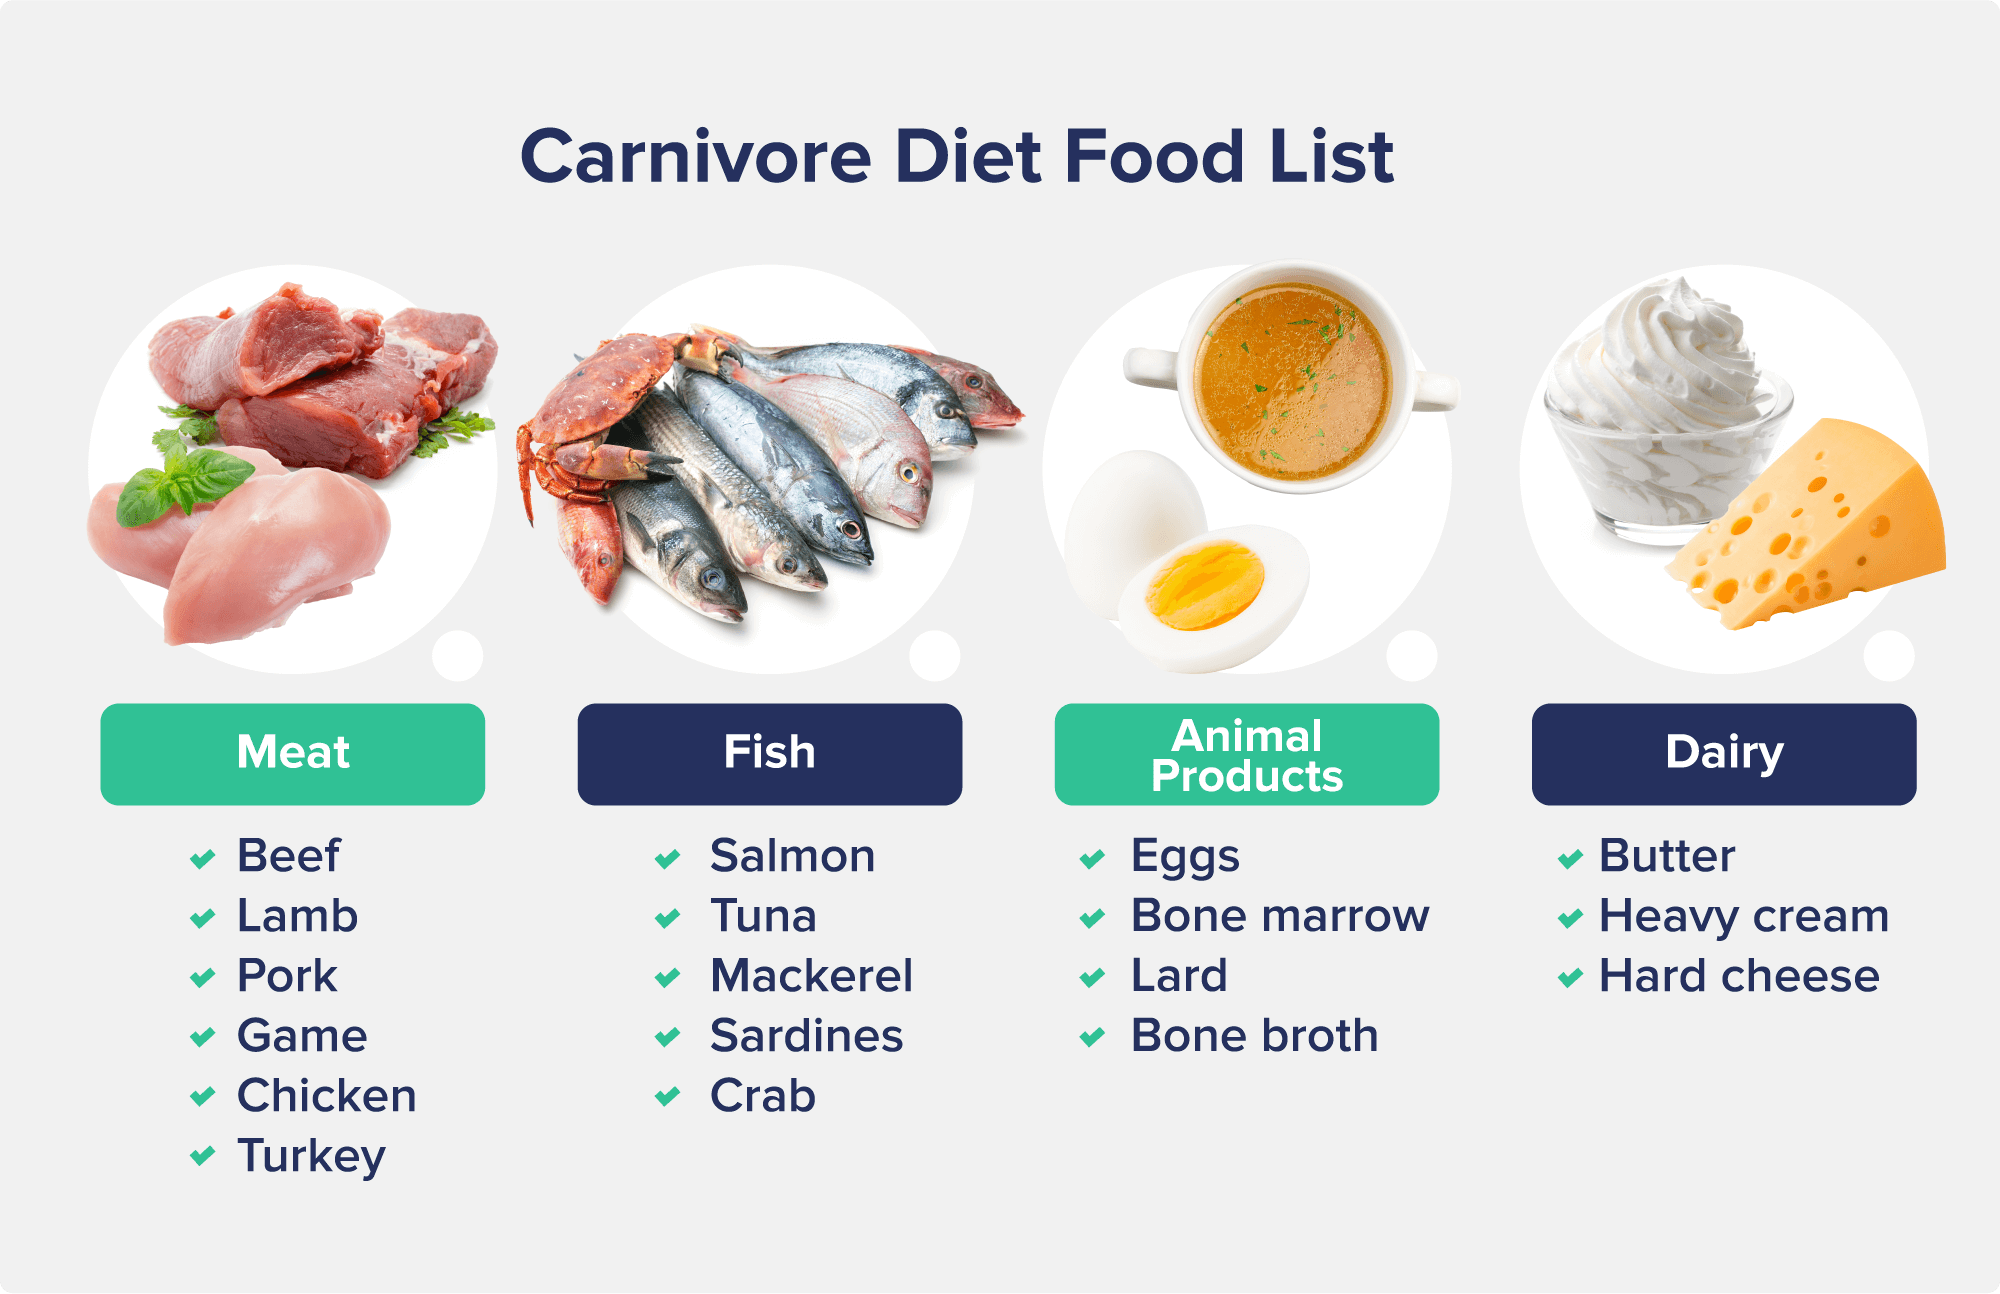 An image entitled Carnivore Diet Food List, showing four major categories of carnivore foods with associated pictures: meat, fish, animal products, and dairy